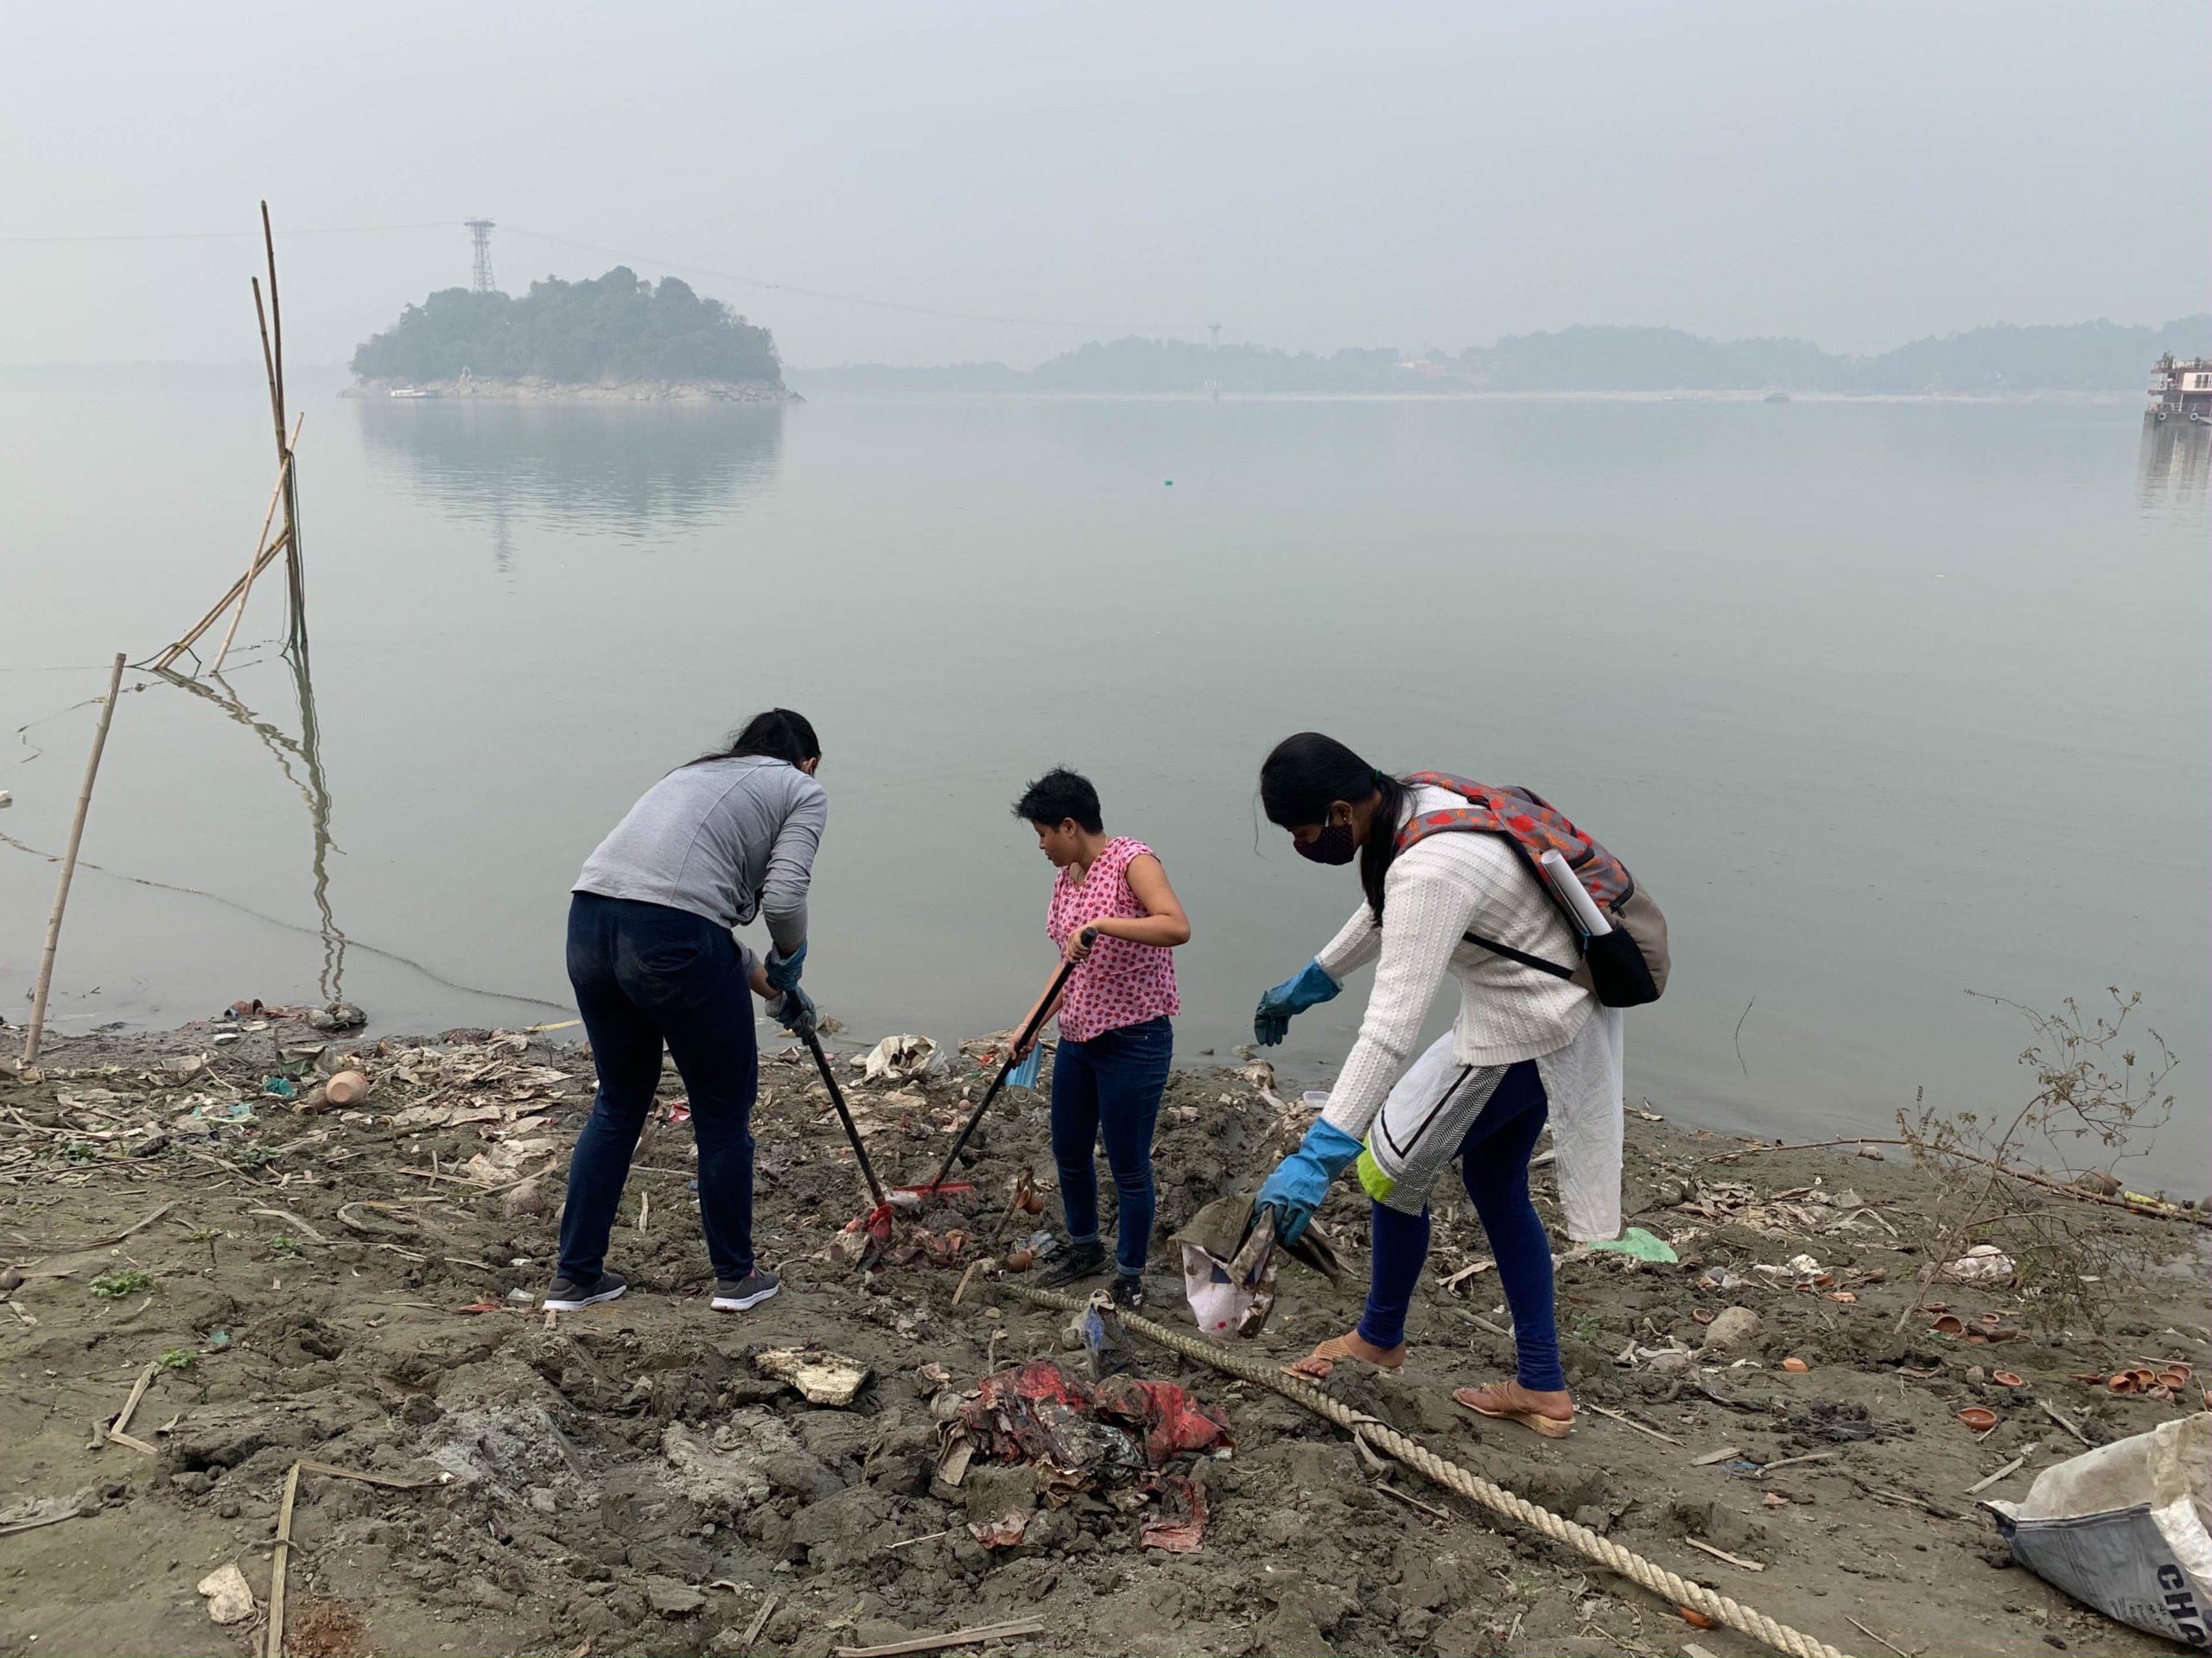 <p>Volunteers from The Midway Journey pick up trash from the Brahmaputra riverbank in Guwahati [Image by: Kasturi Das]</p>